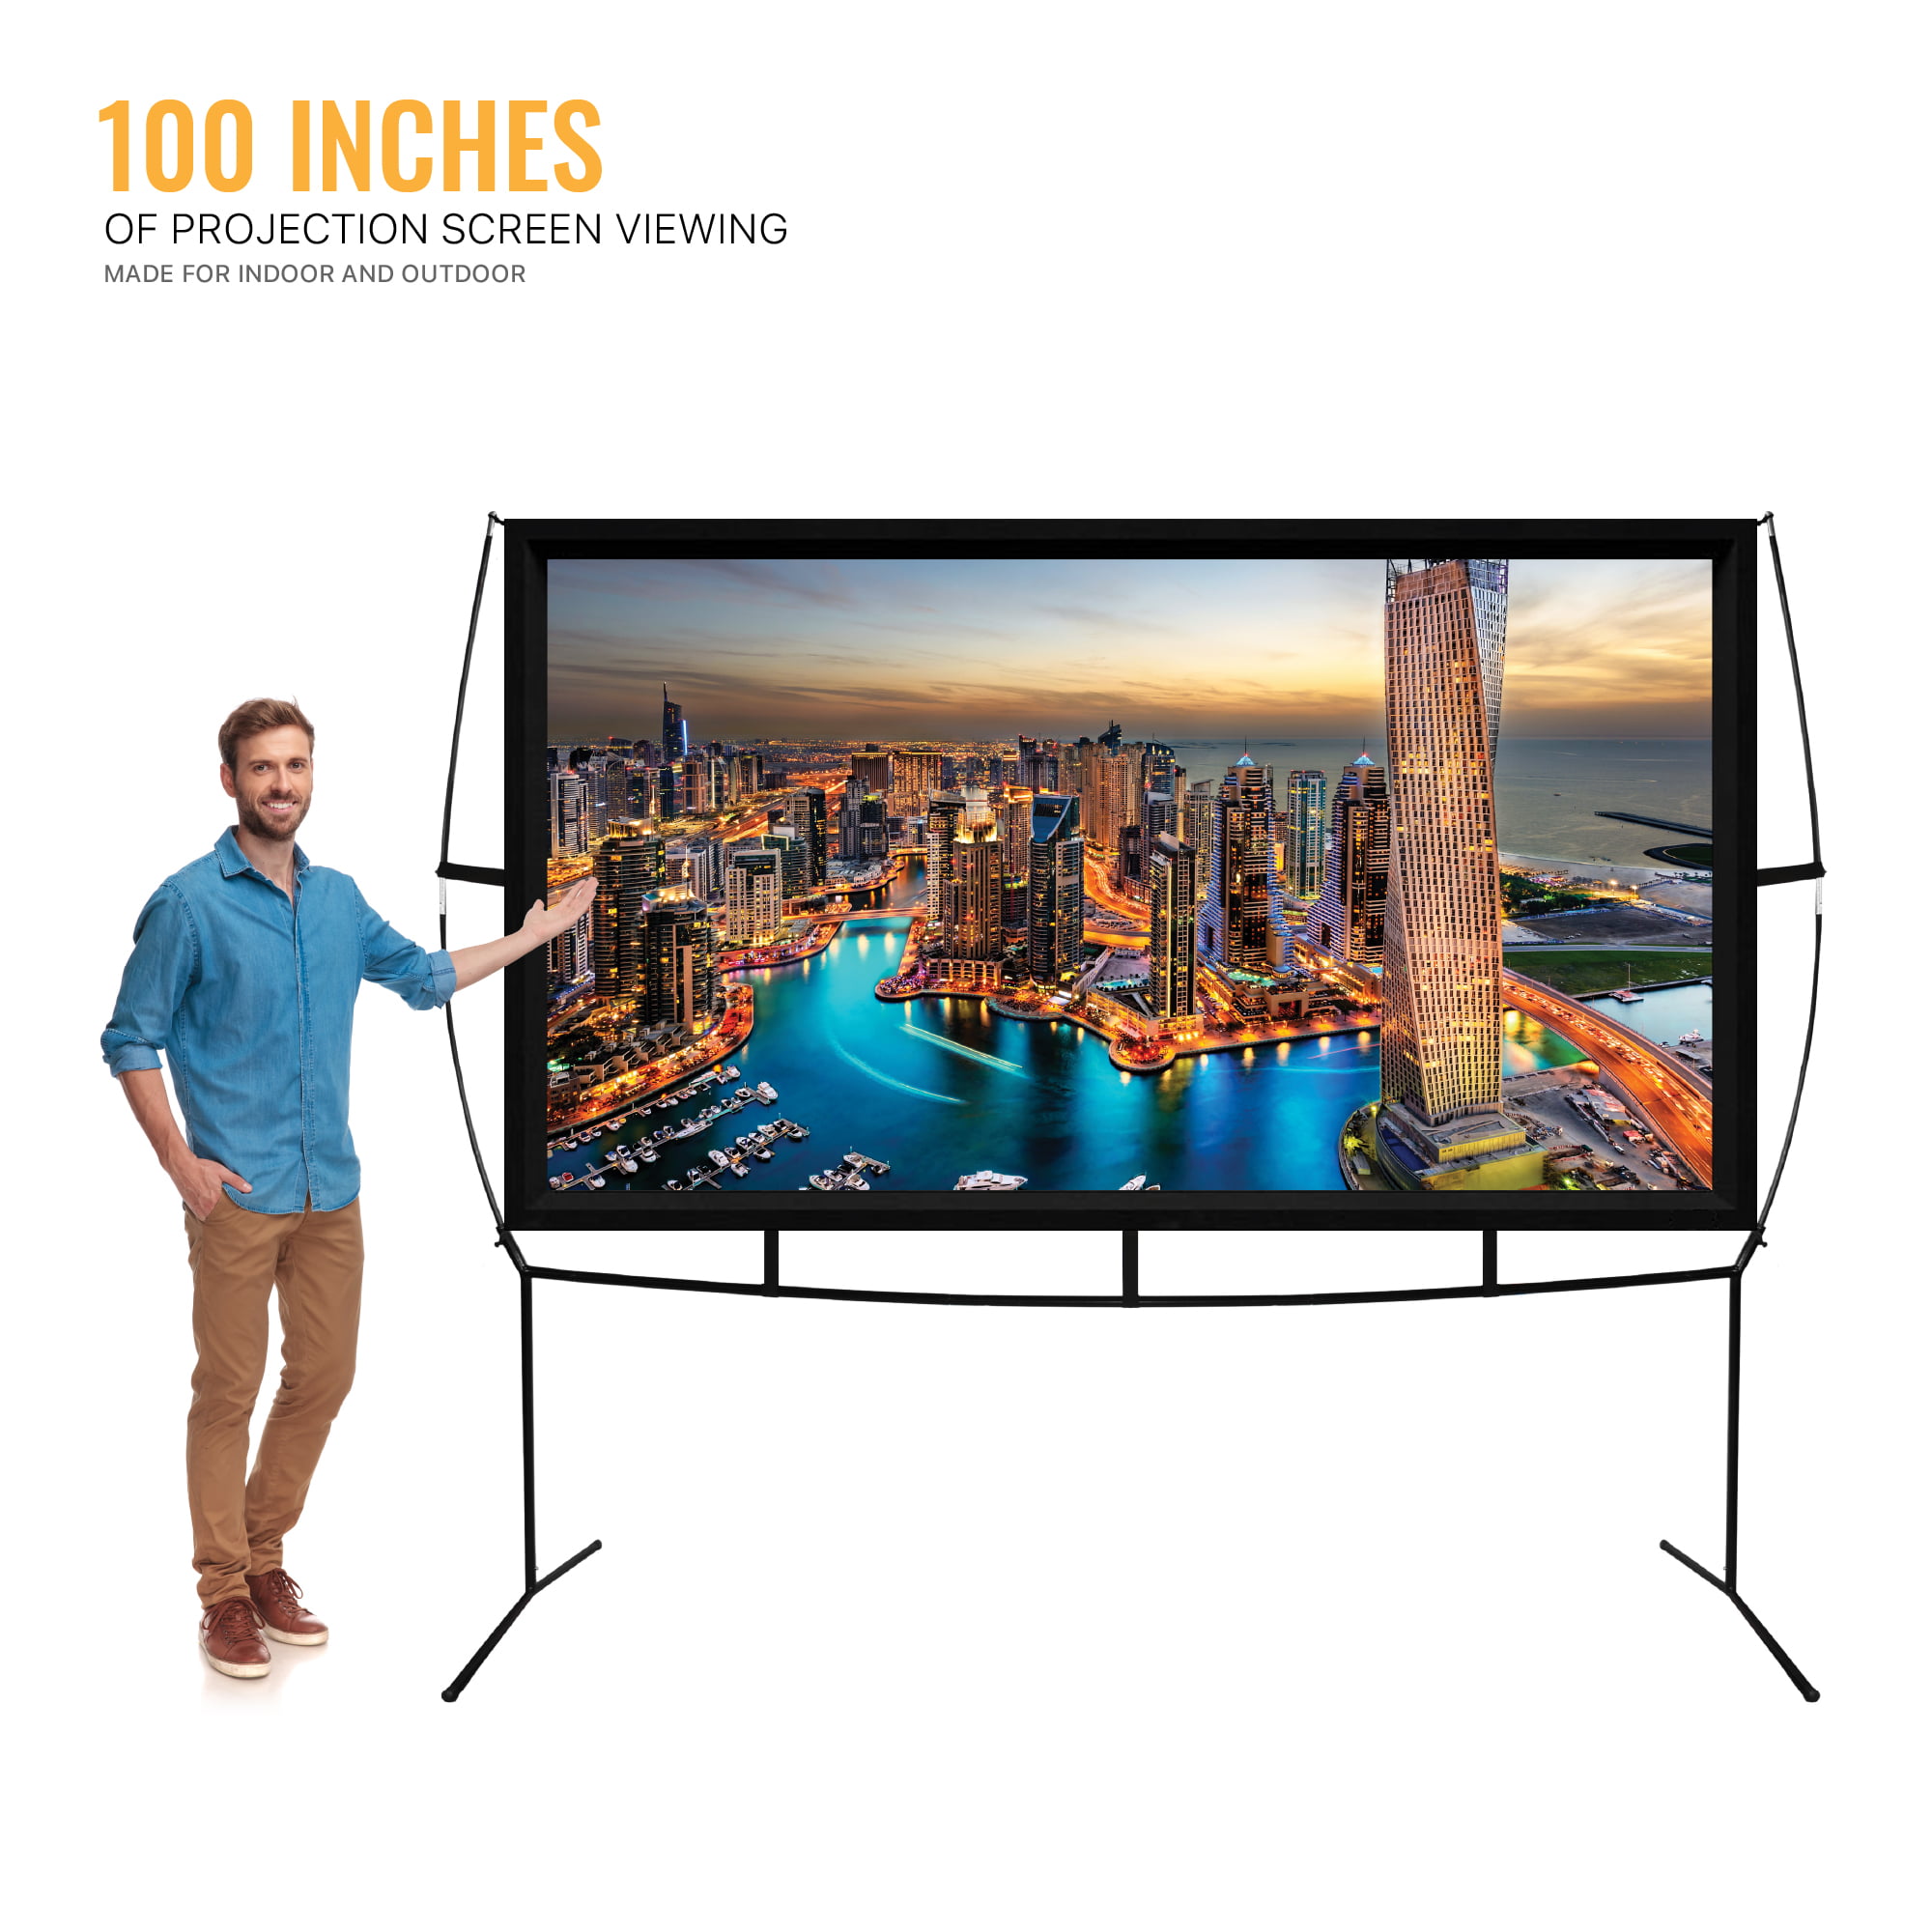 HD Projection Screen Outdoor Indoor Portable Polyester Fabric Homehold Movie Screen AFXOBO 16:9 Projector Screen 